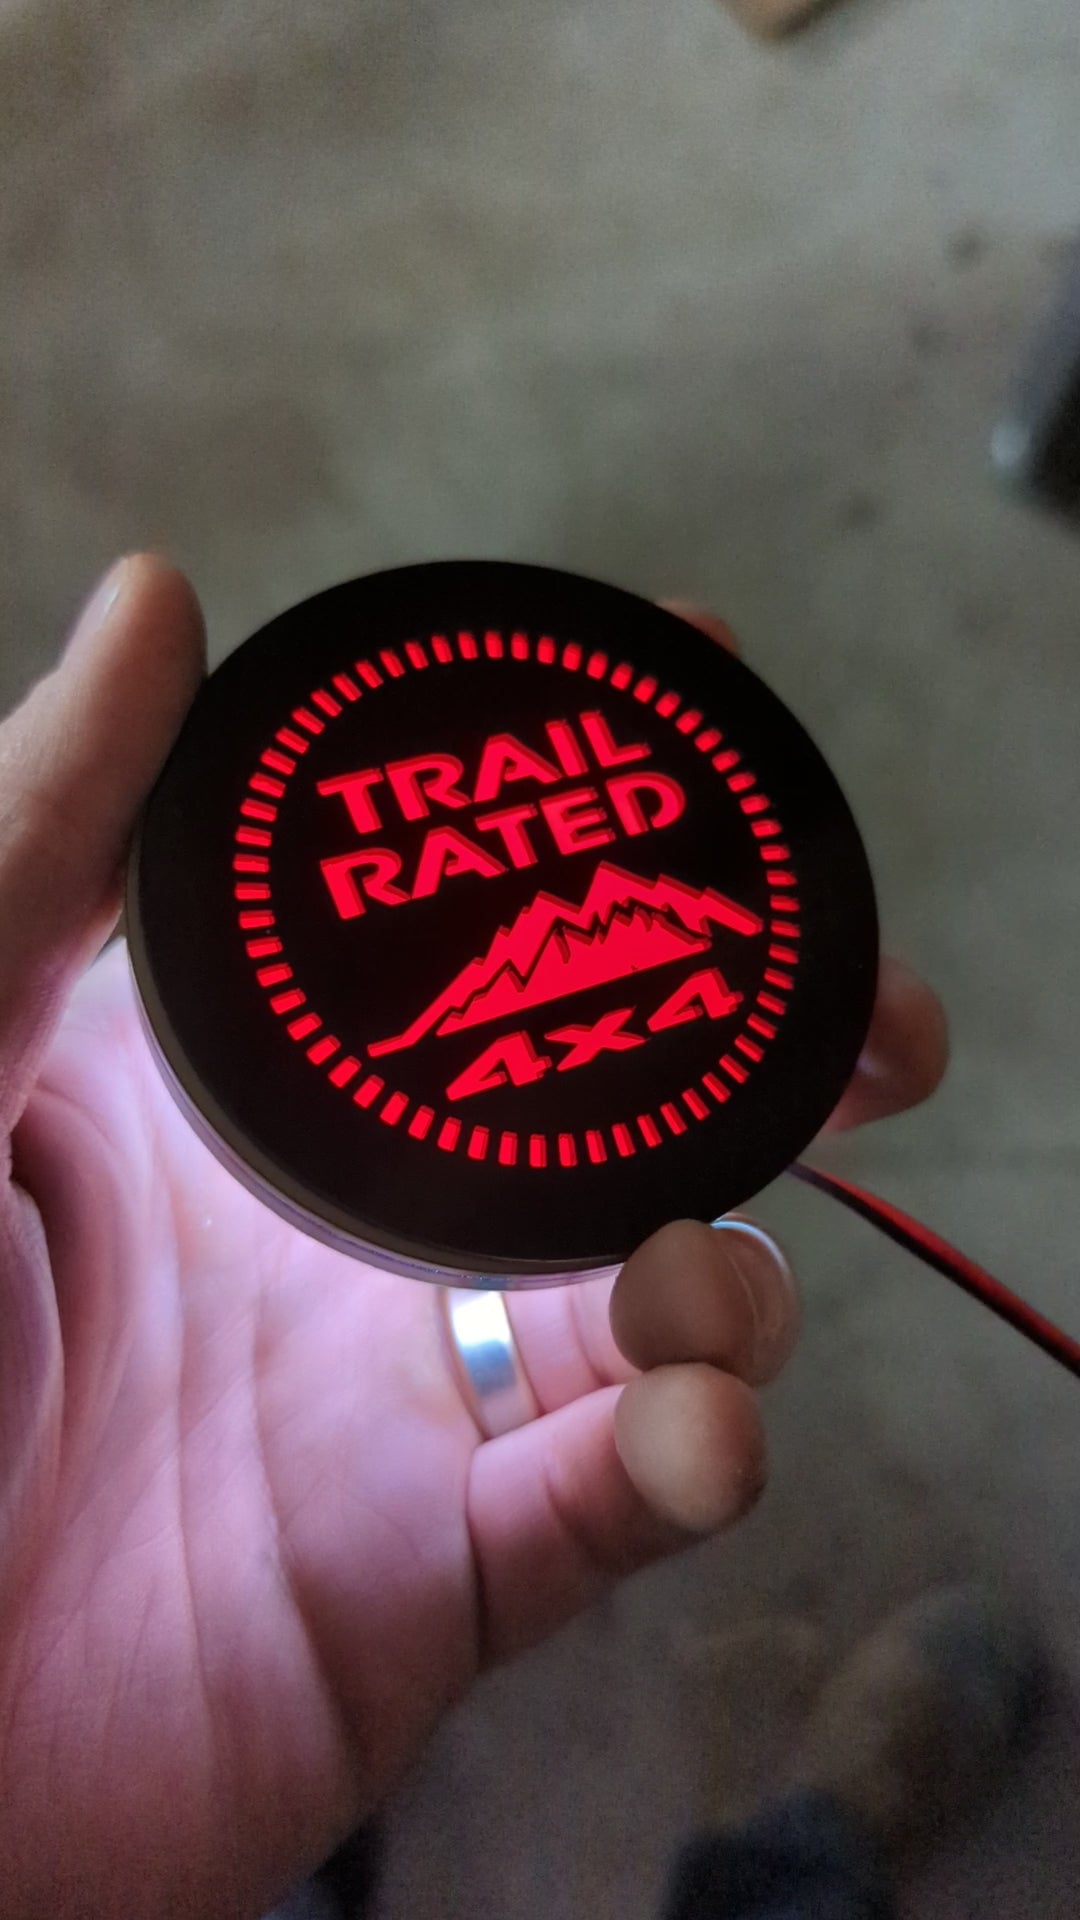 LED Jeep Trail Rated 4x4 Badge - Officially Licensed - Black and Red